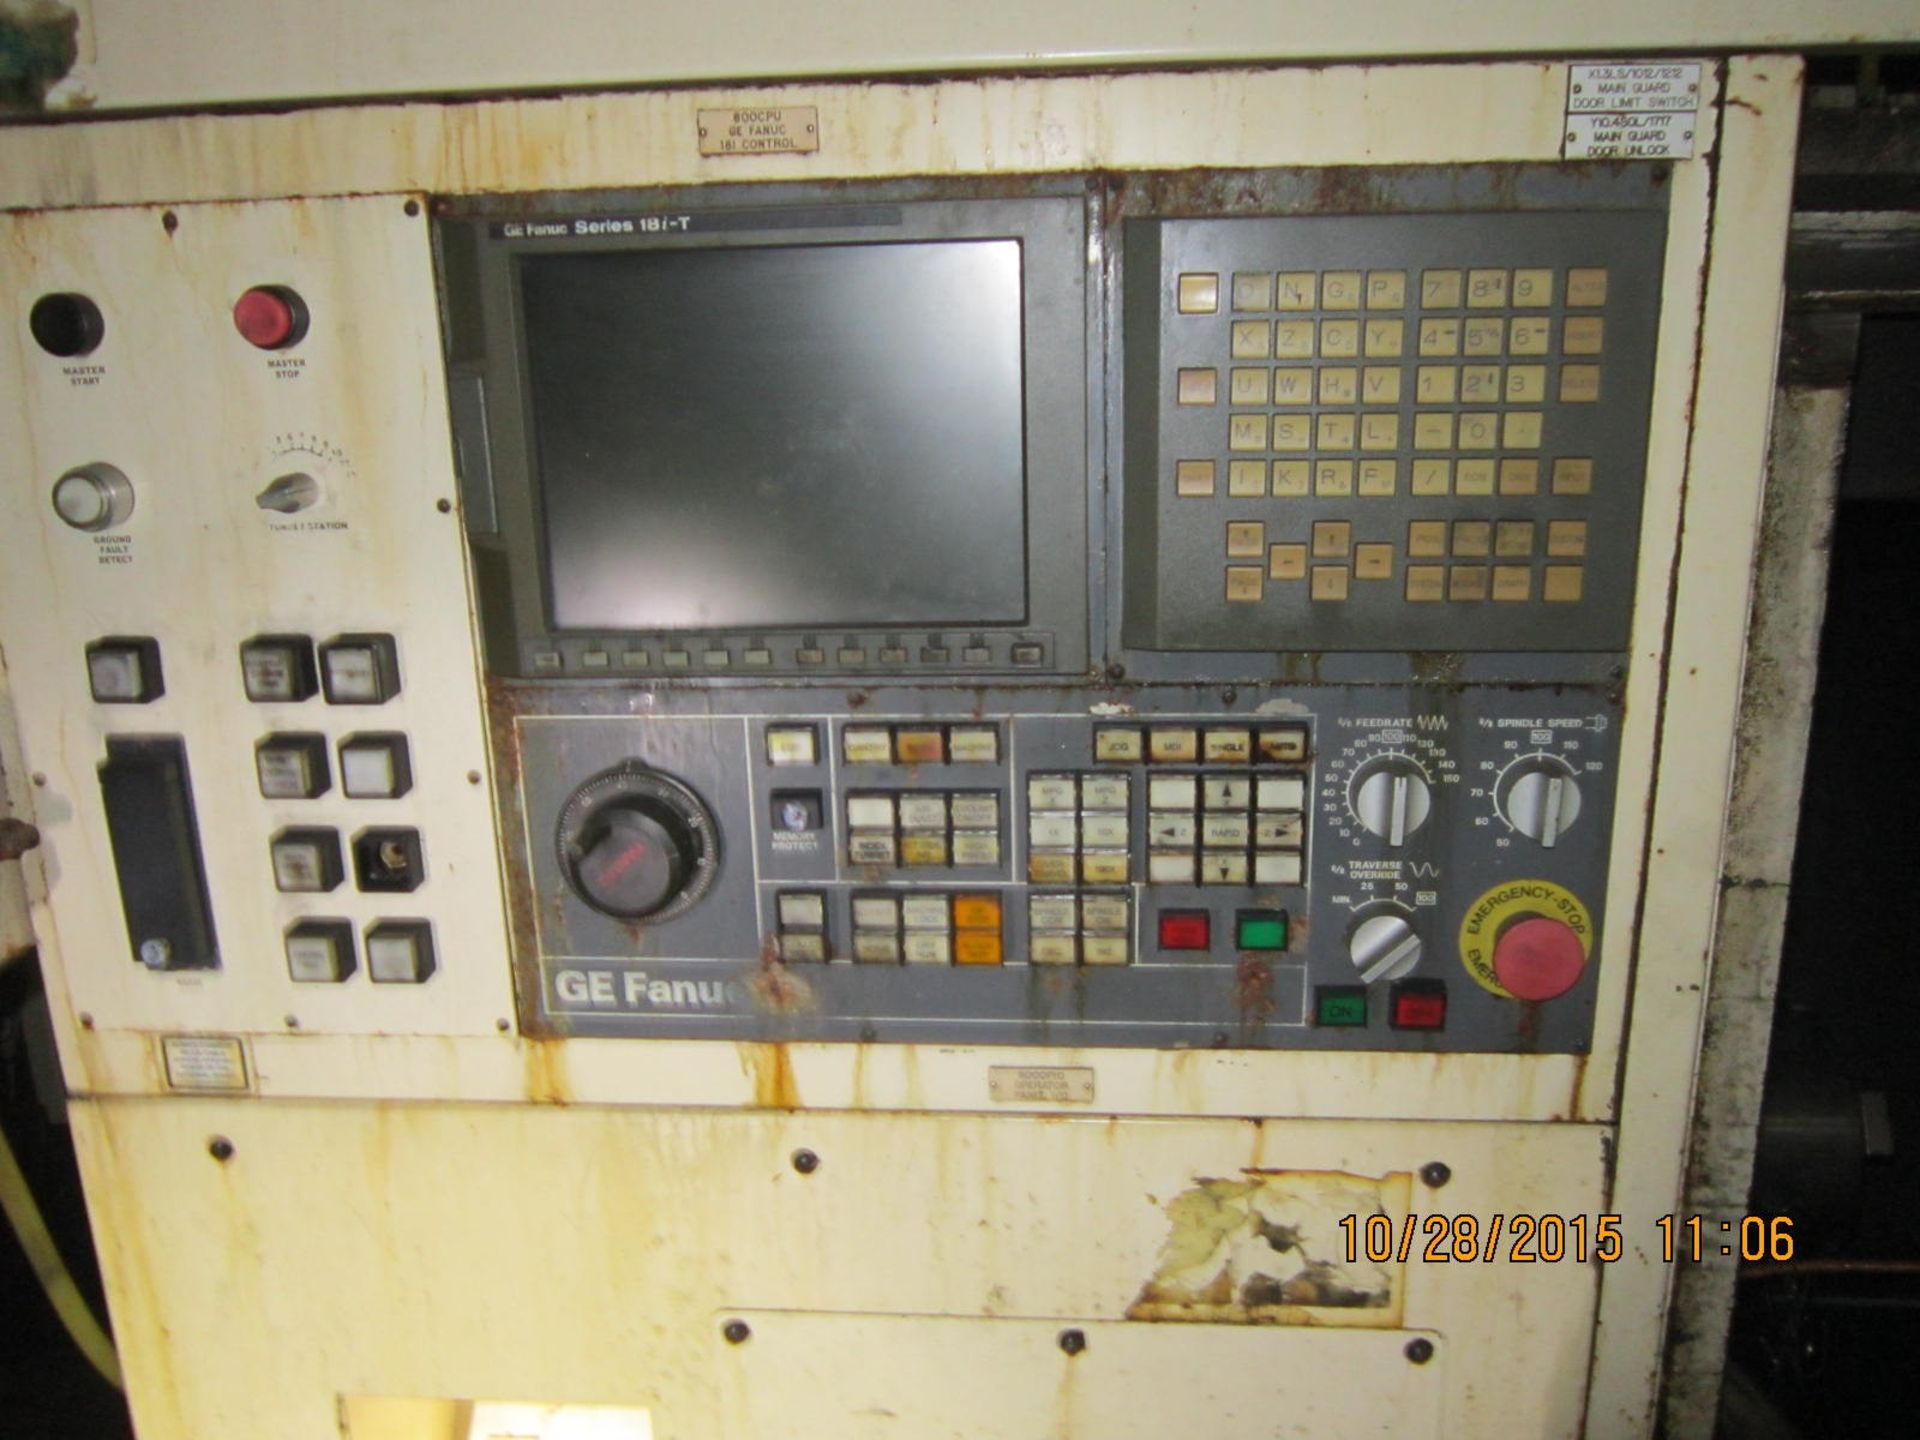 HARDINGE MODEL CSA 65 CNC LATHE WITH LOADER, 1999, LOCATION MI, BUYER TO LOAD AND SHIP - Image 3 of 4